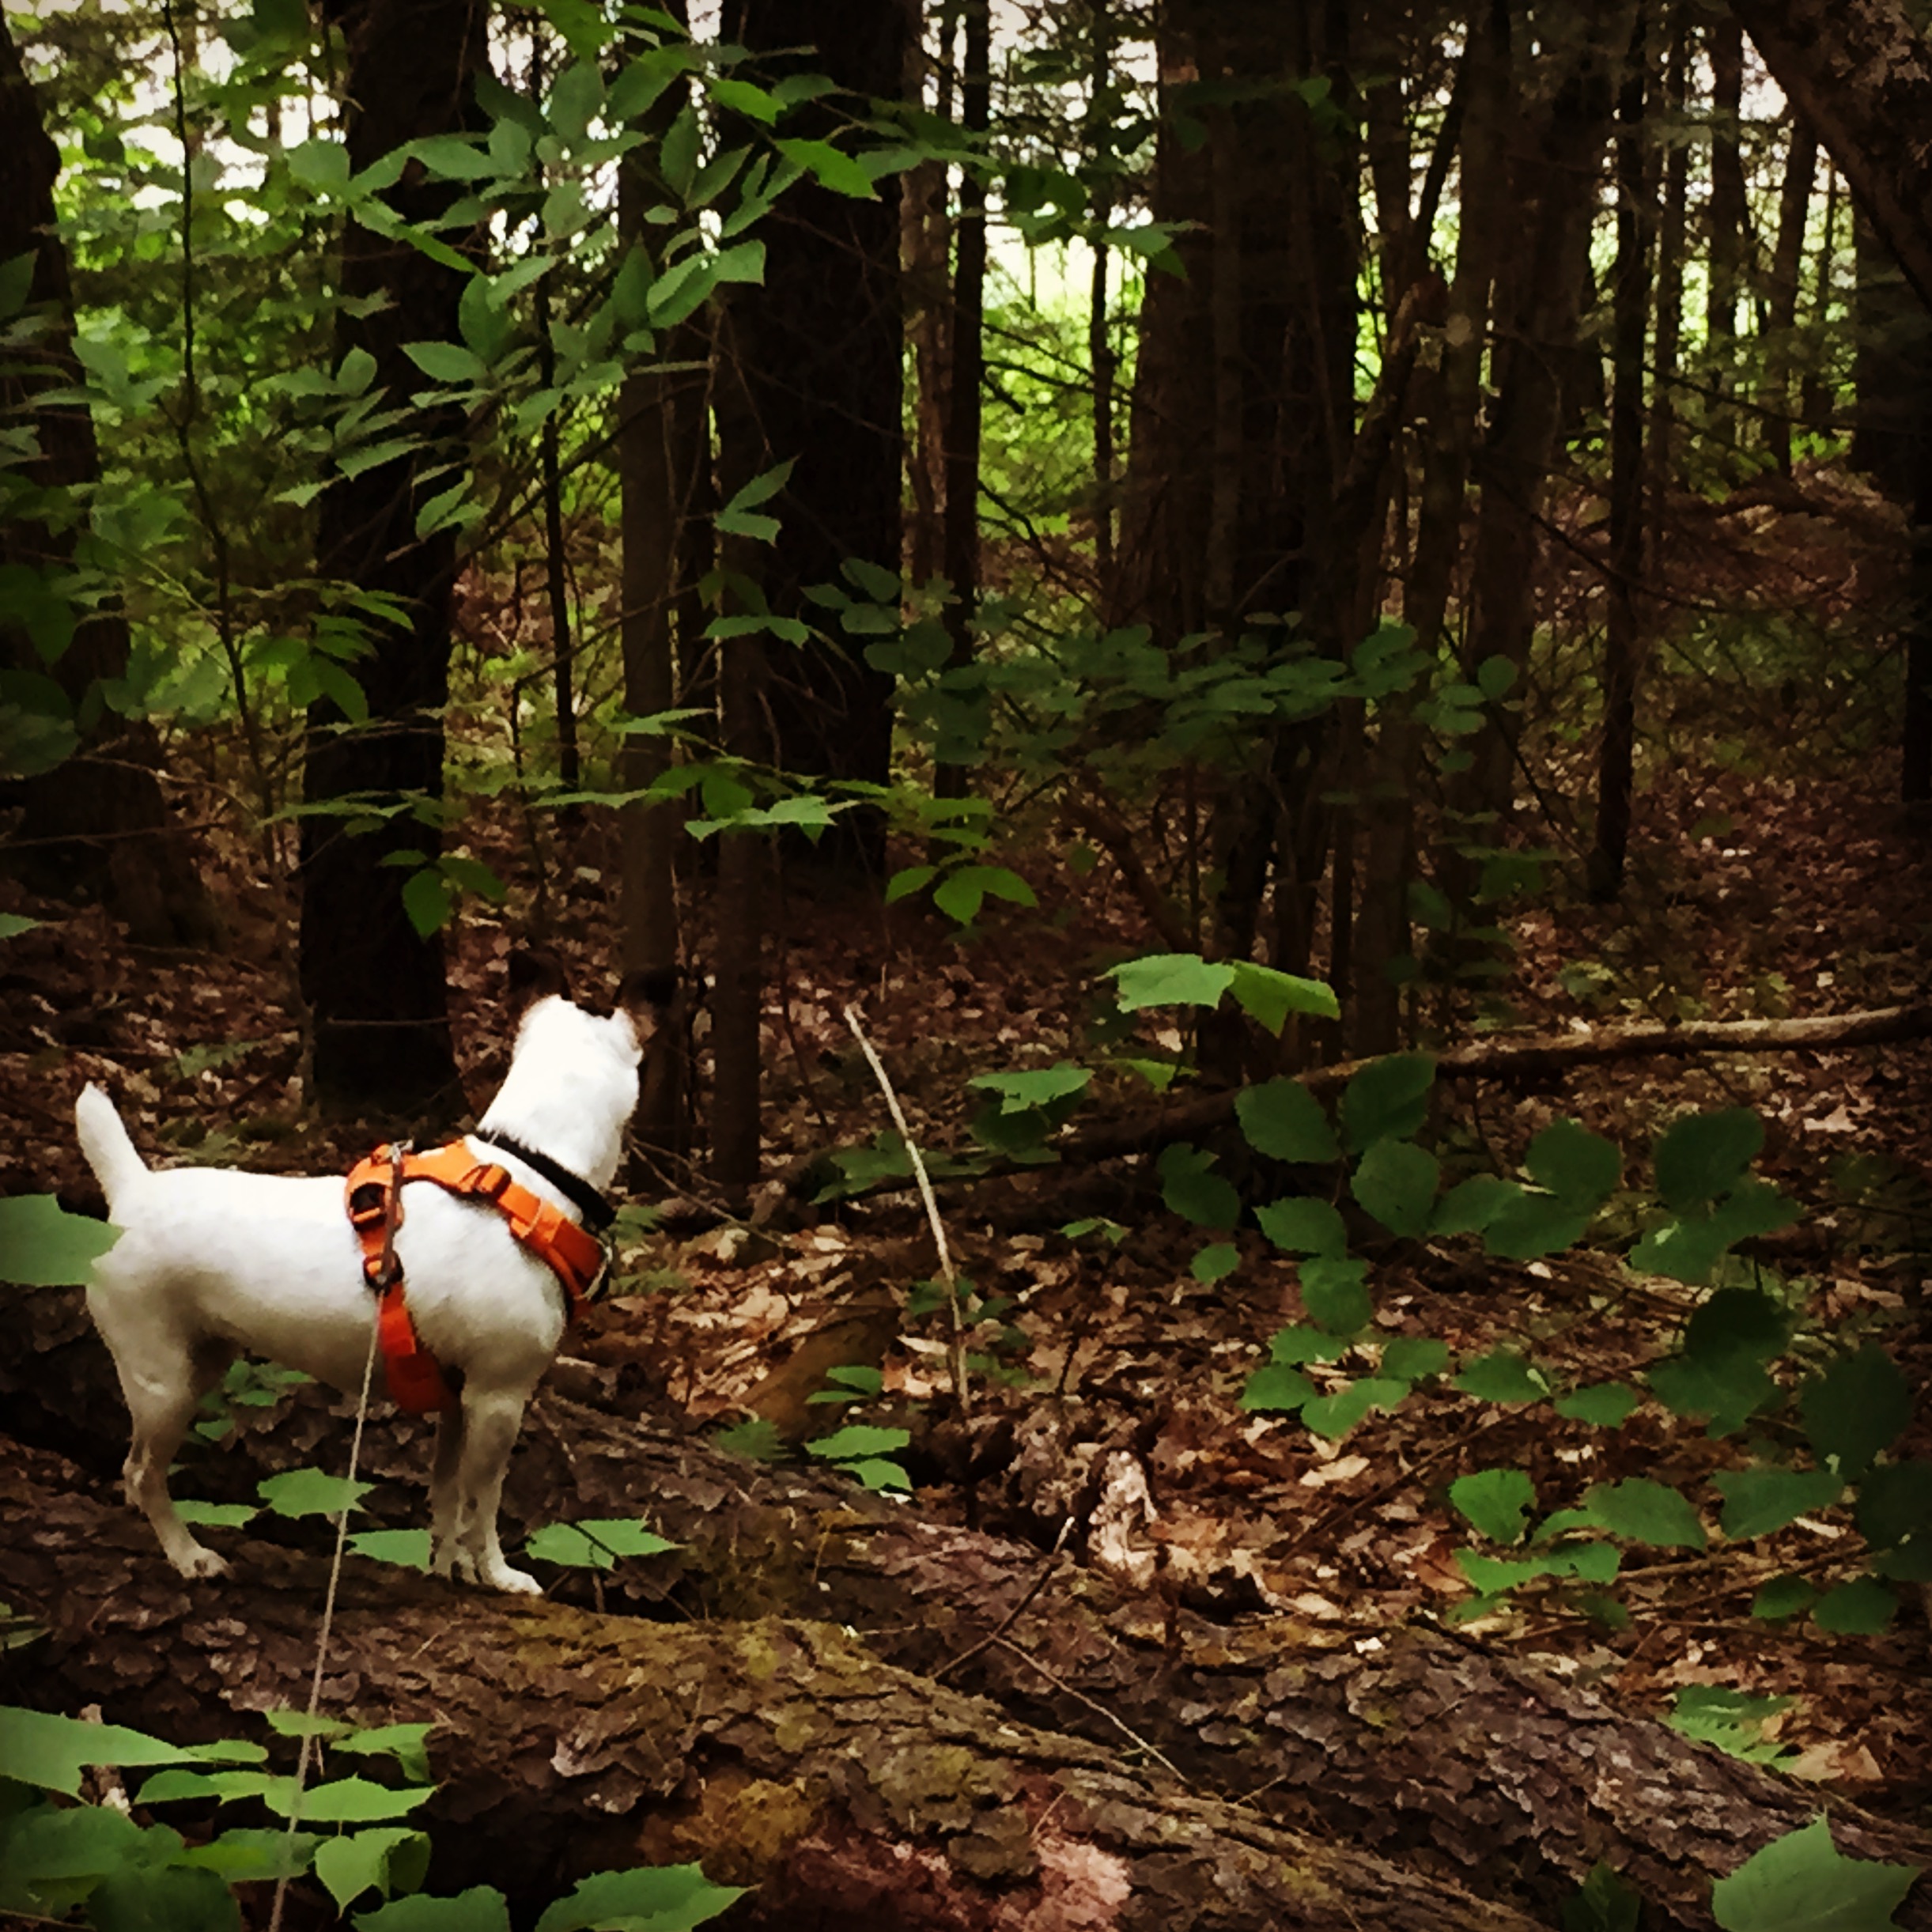  The little dog always has something to watch when we wander in the woods. 